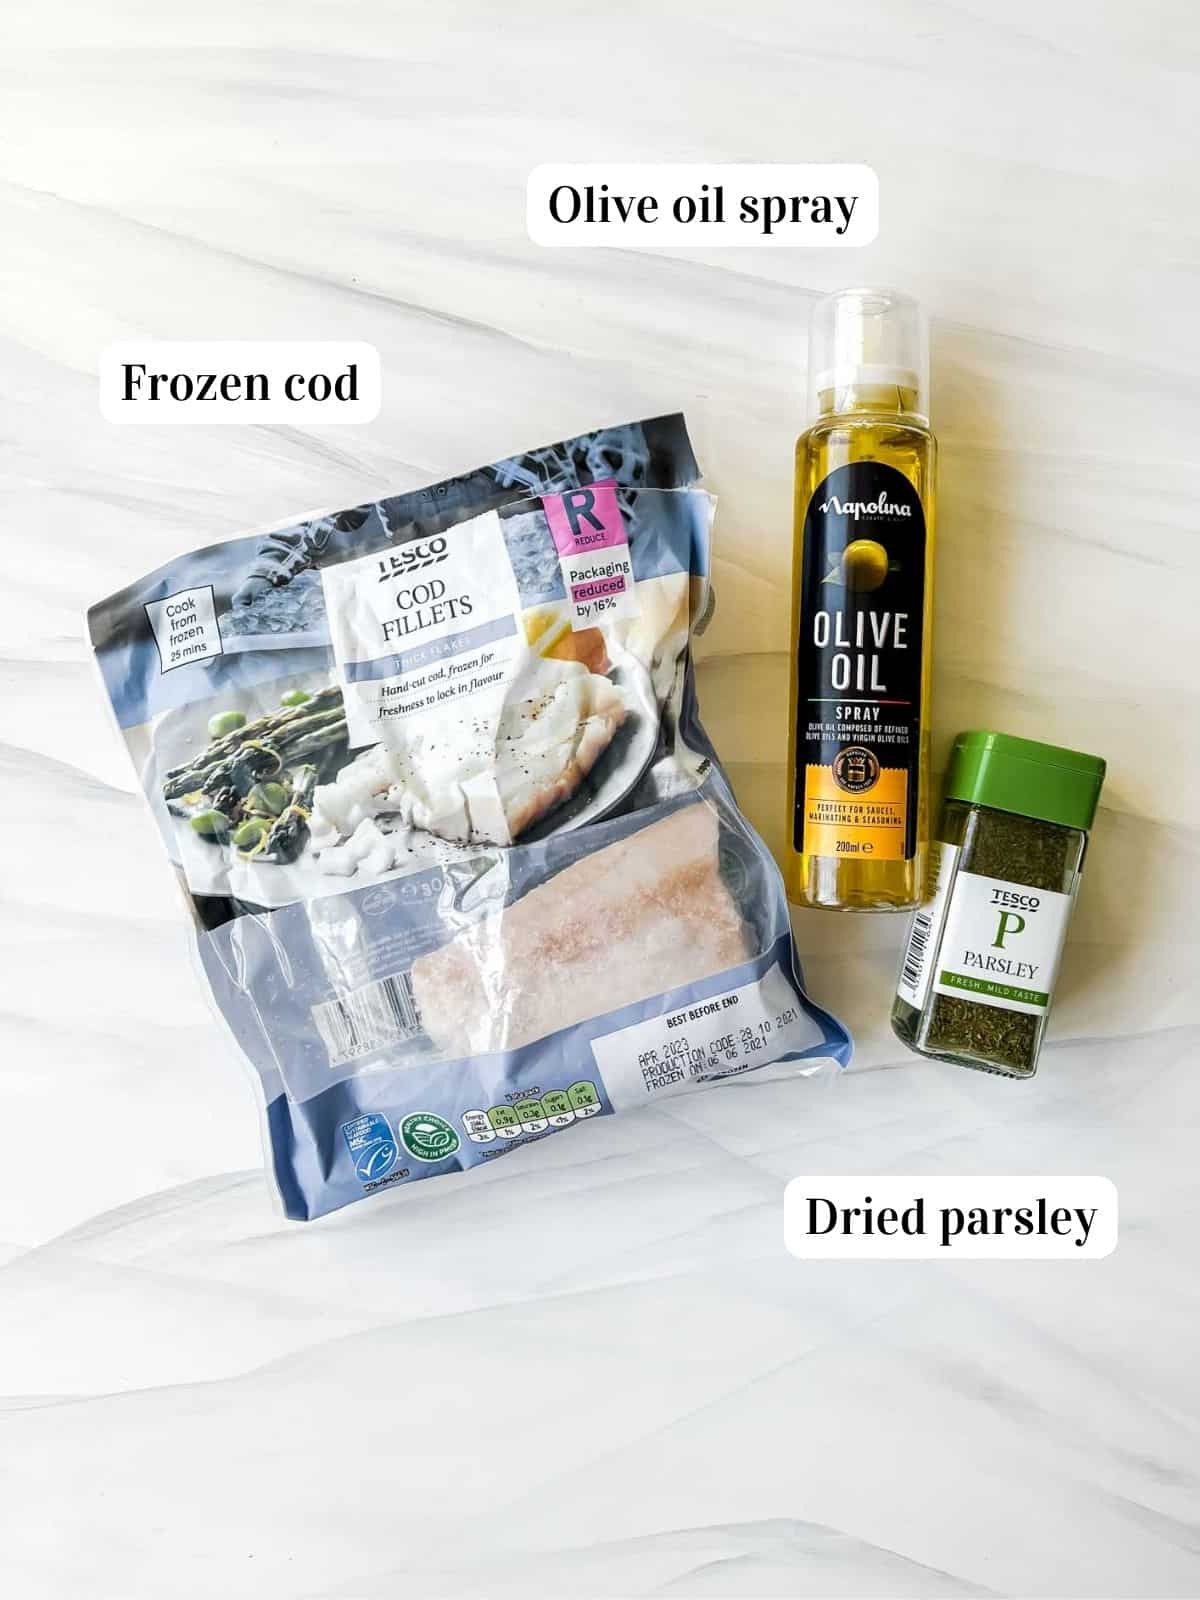 individually labelled ingredients to make air fryer frozen cod including olive oil and dried parsley.